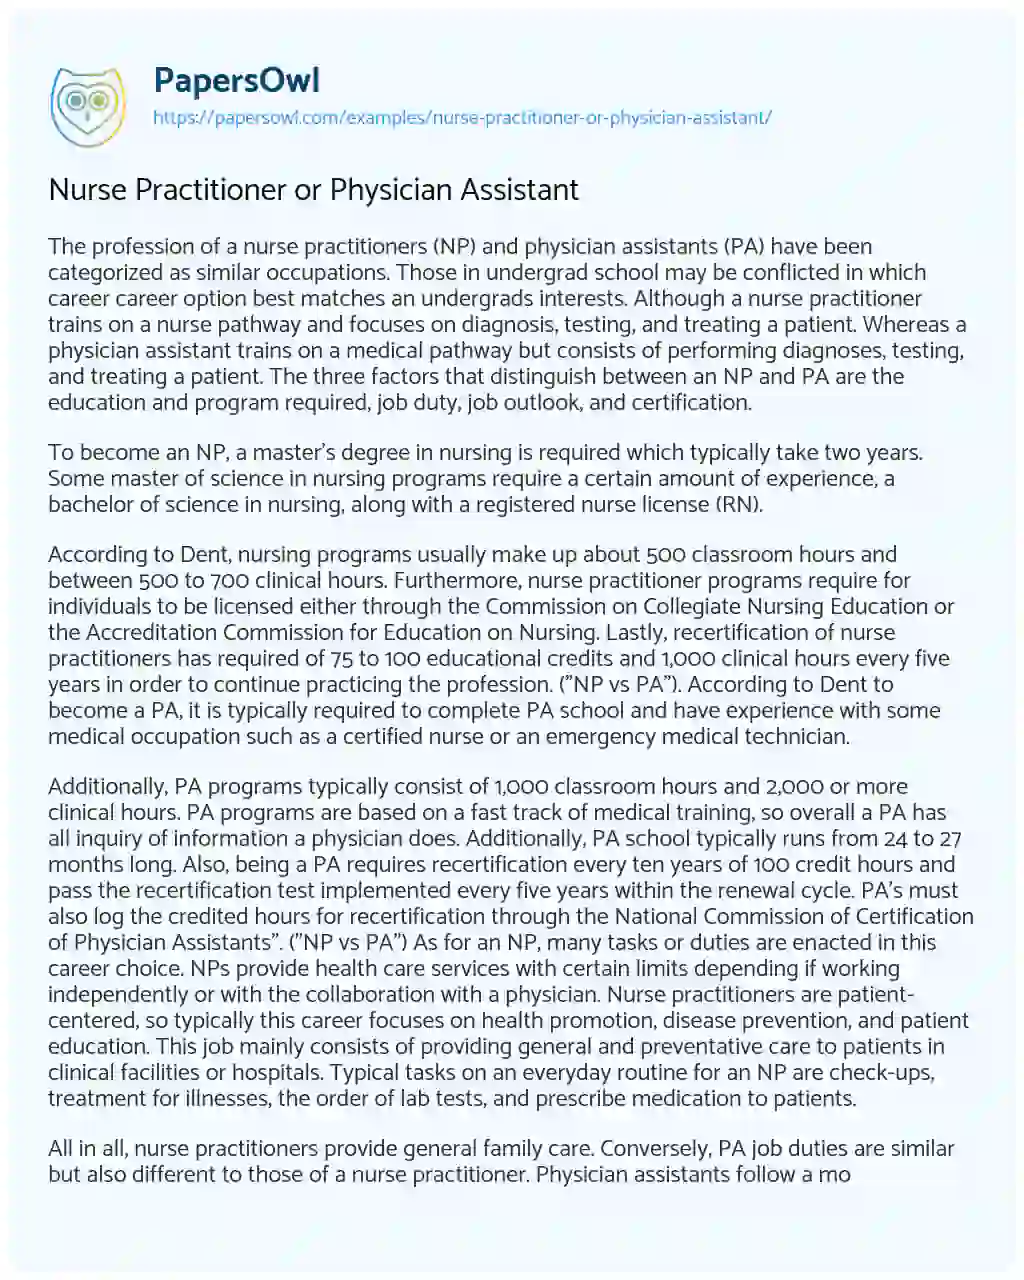 Essay on Nurse Practitioner or Physician Assistant